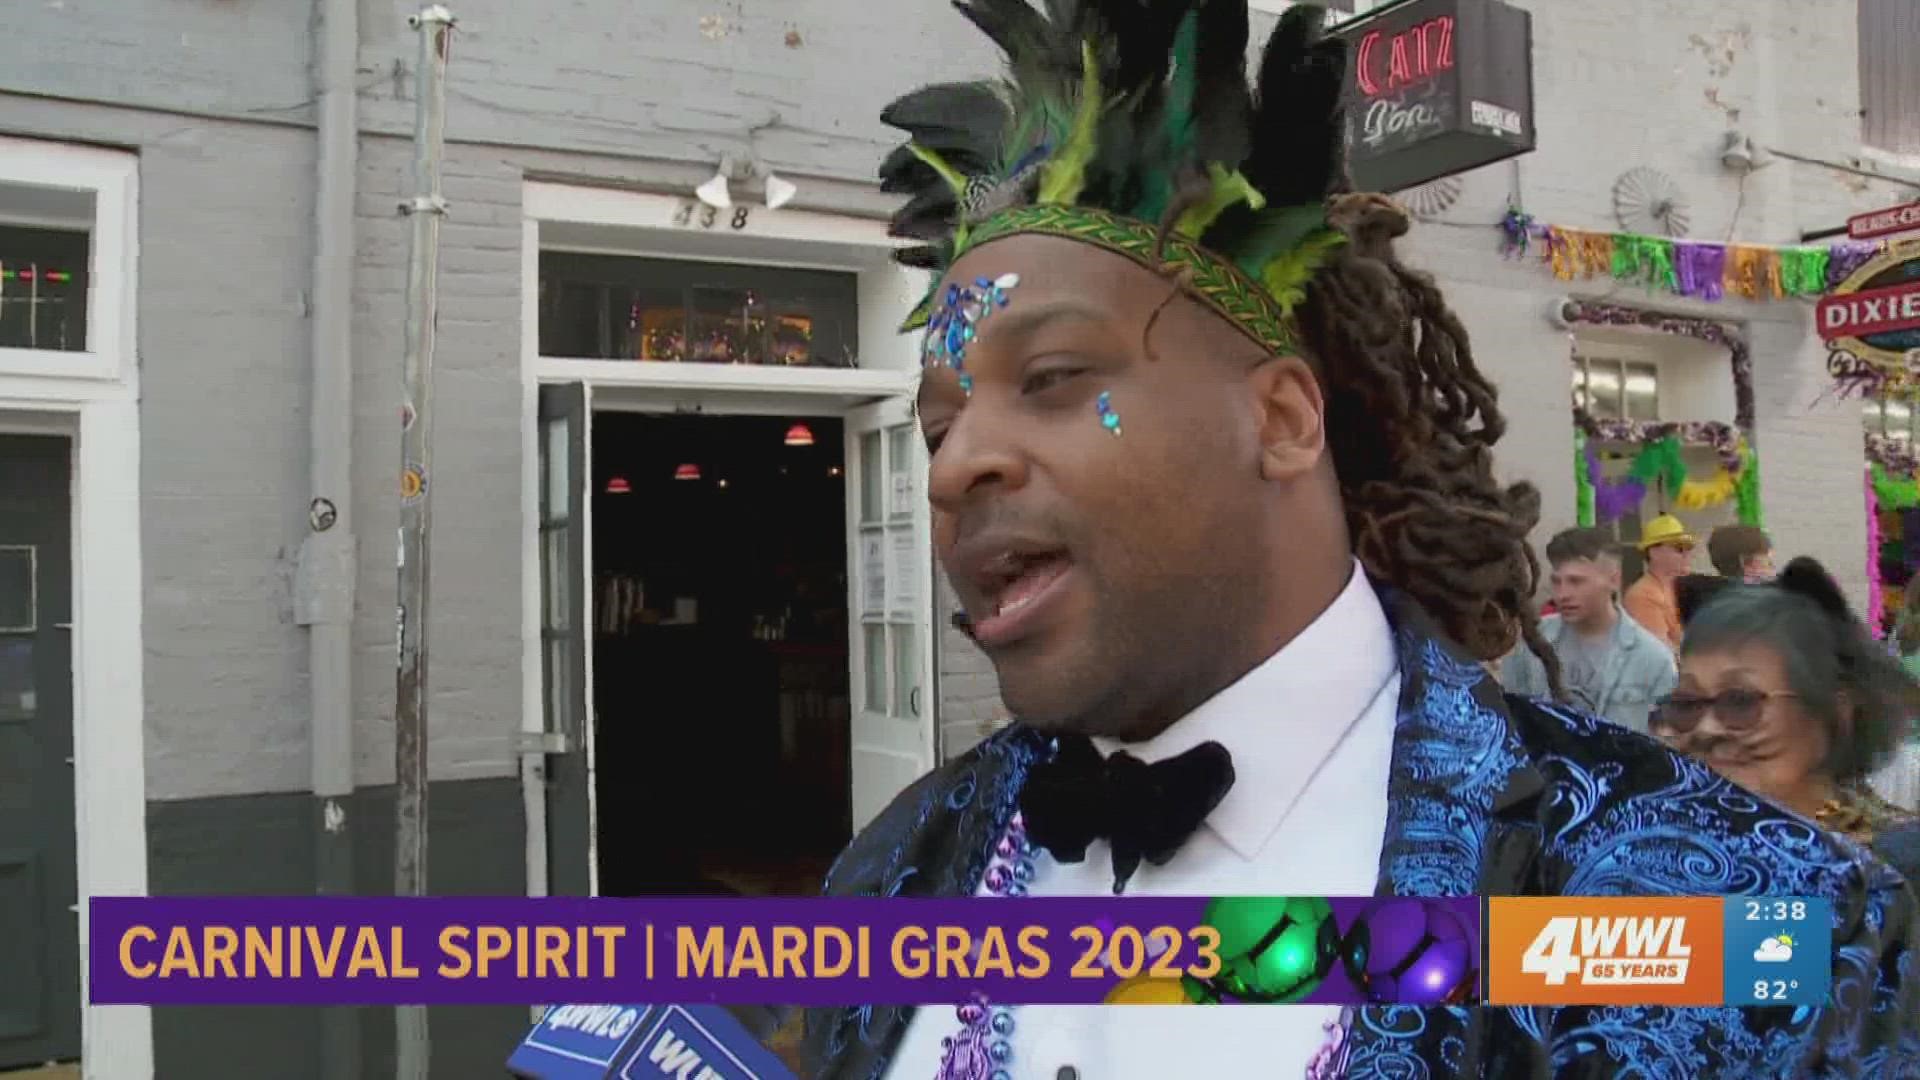 We caught up with some Bourbon Street Mardi Gras savants to see what their favorite thing is about Mardi Gras.